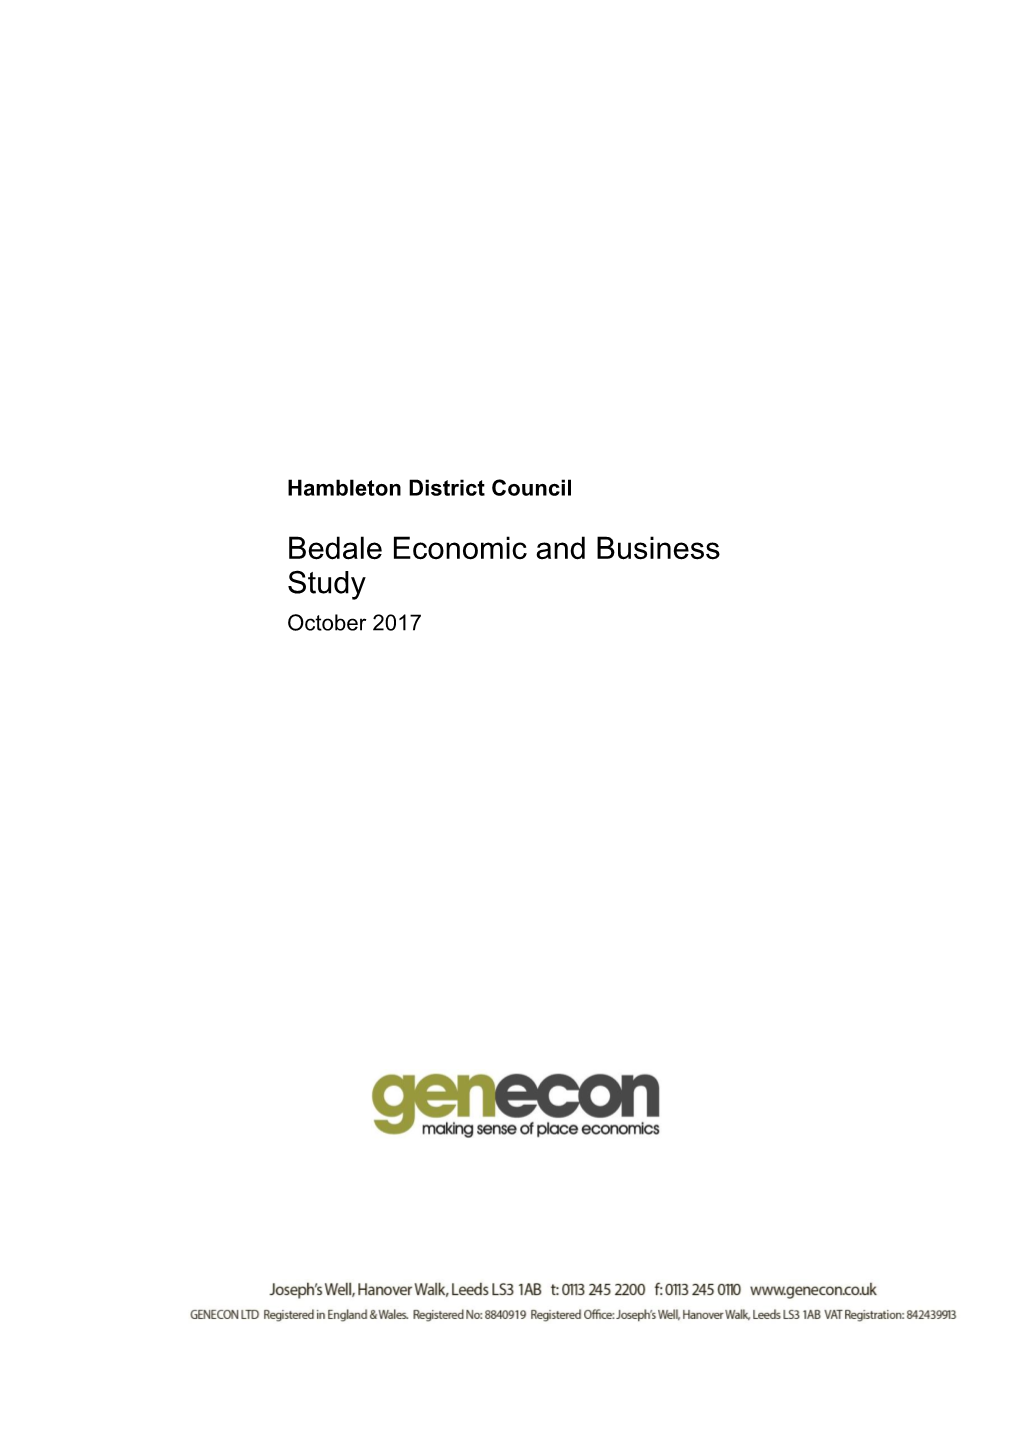 SD54 Bedale Economic and Business Study